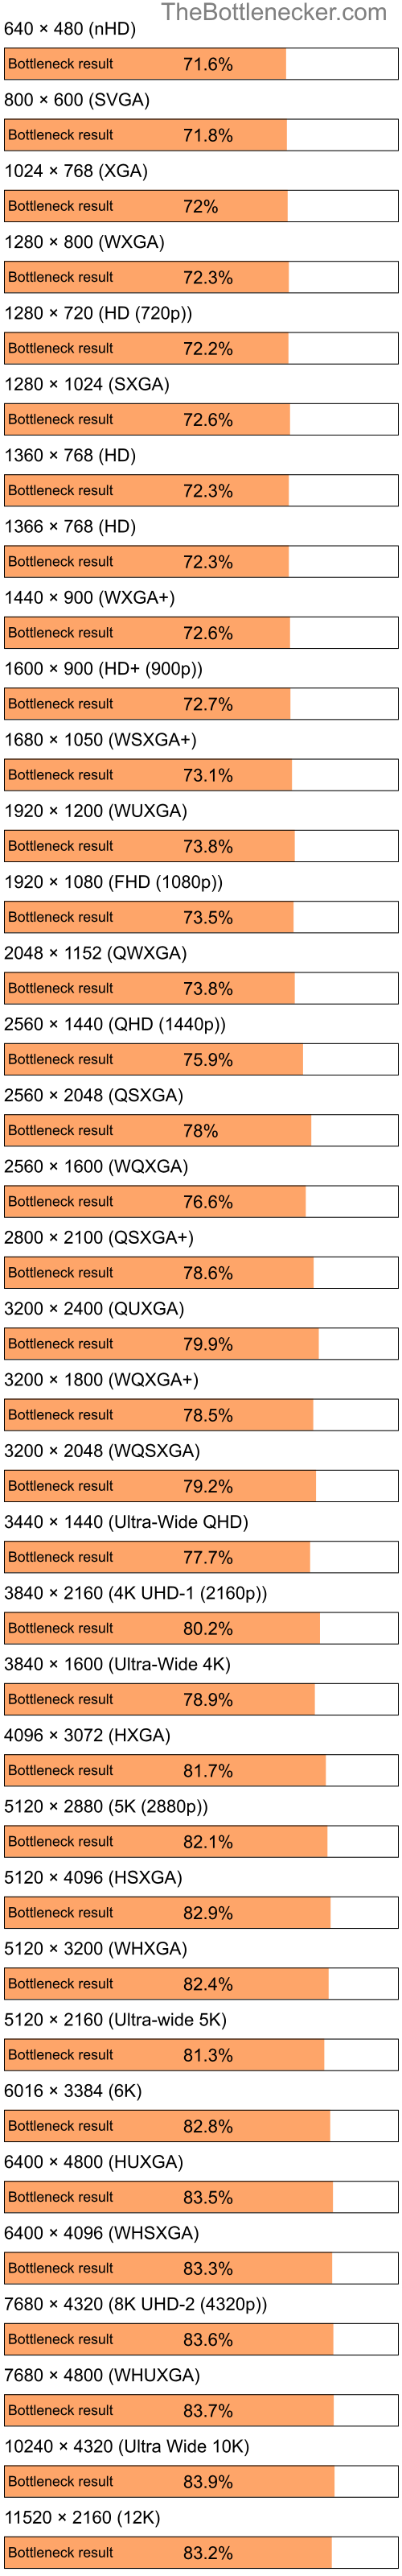 Bottleneck results by resolution for Intel Atom Z520 and AMD Mobility Radeon HD 2300 in General Tasks